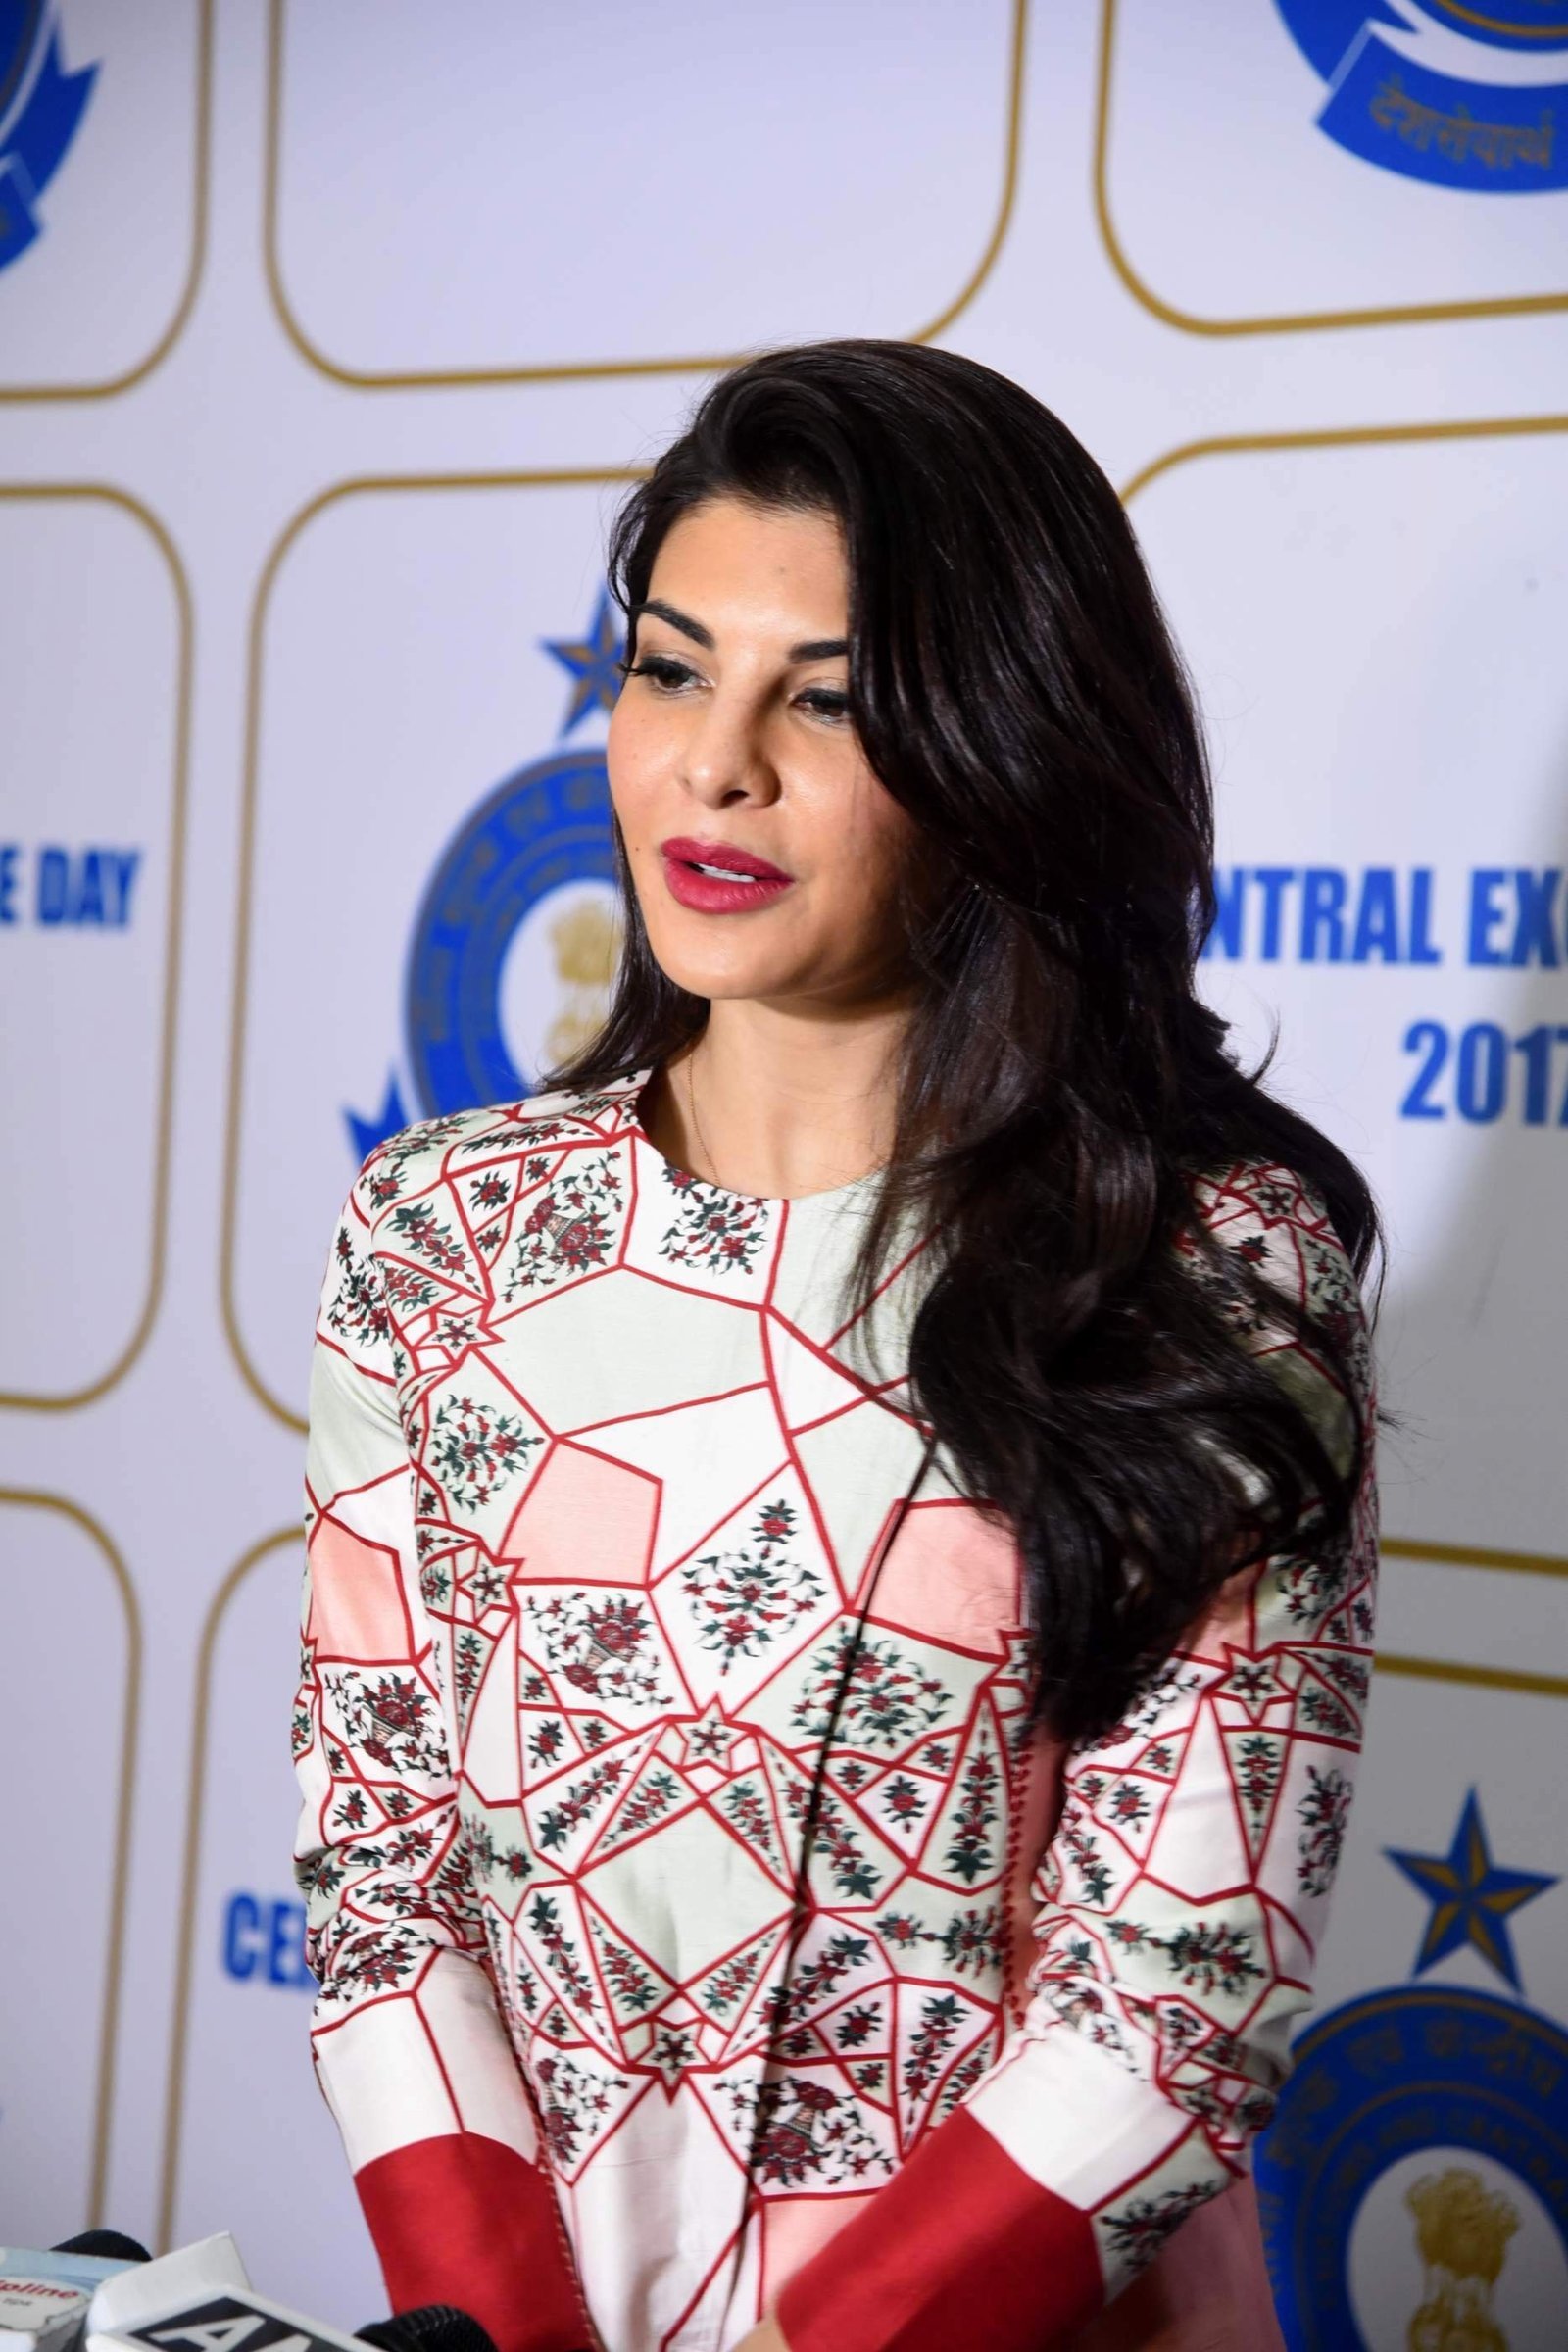 Jacqueline Fernandez - Bollywood celebrities attended Central Excise Day Celebration Images | Picture 1475718